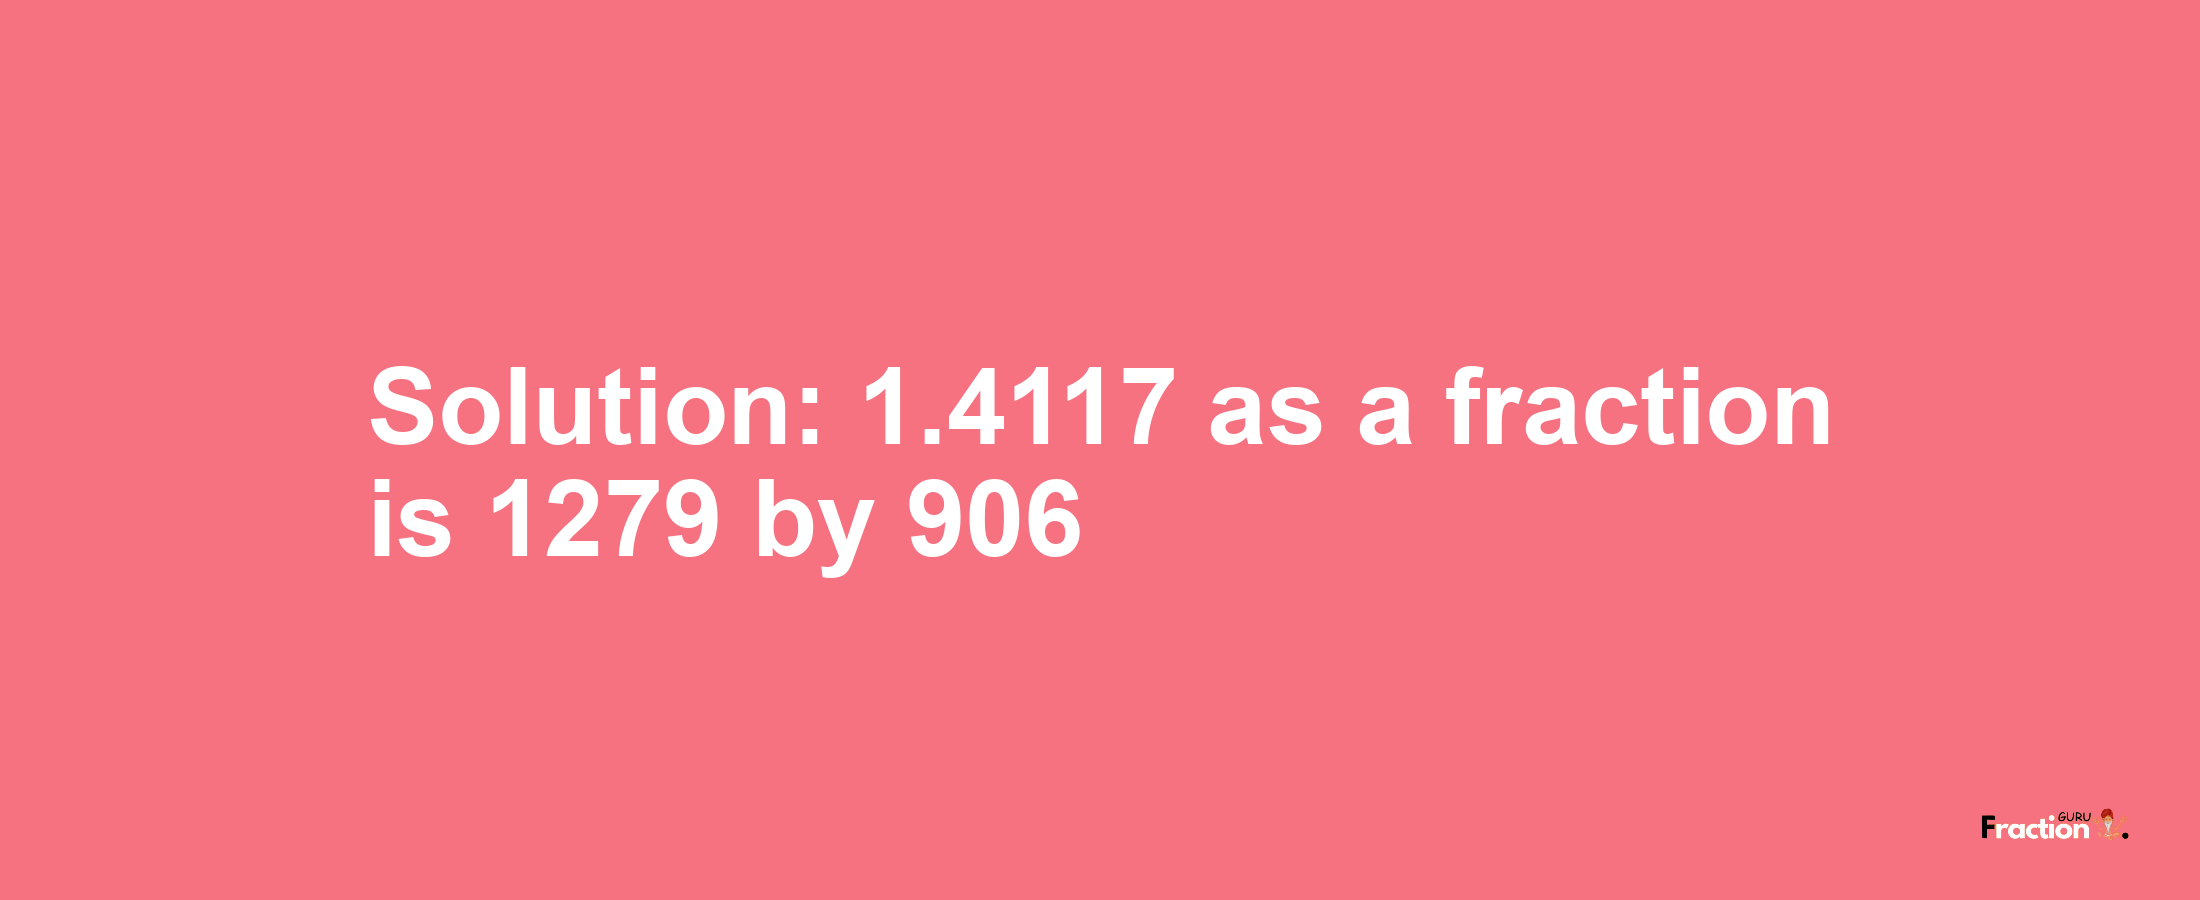 Solution:1.4117 as a fraction is 1279/906